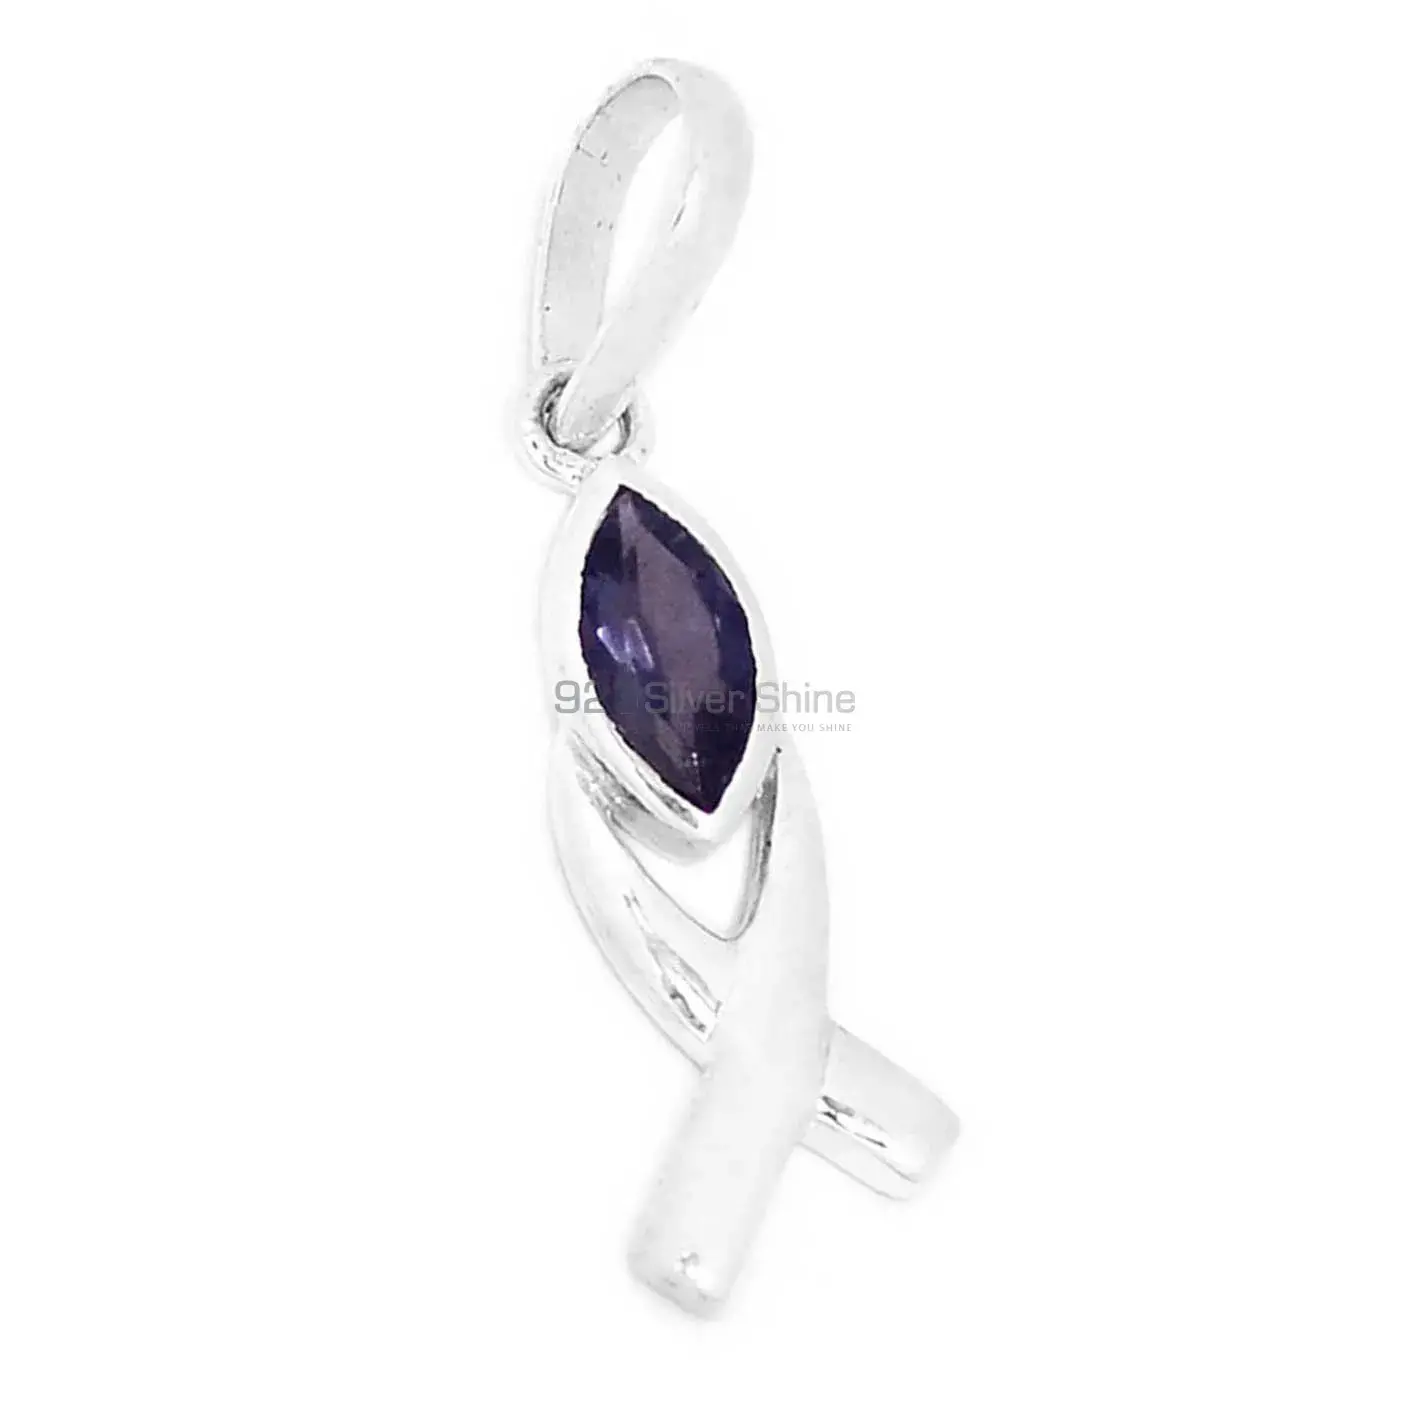 Top Quality Iolite Gemstone Pendants Wholesaler In Fine Sterling Silver Jewelry 925SP283-2_1